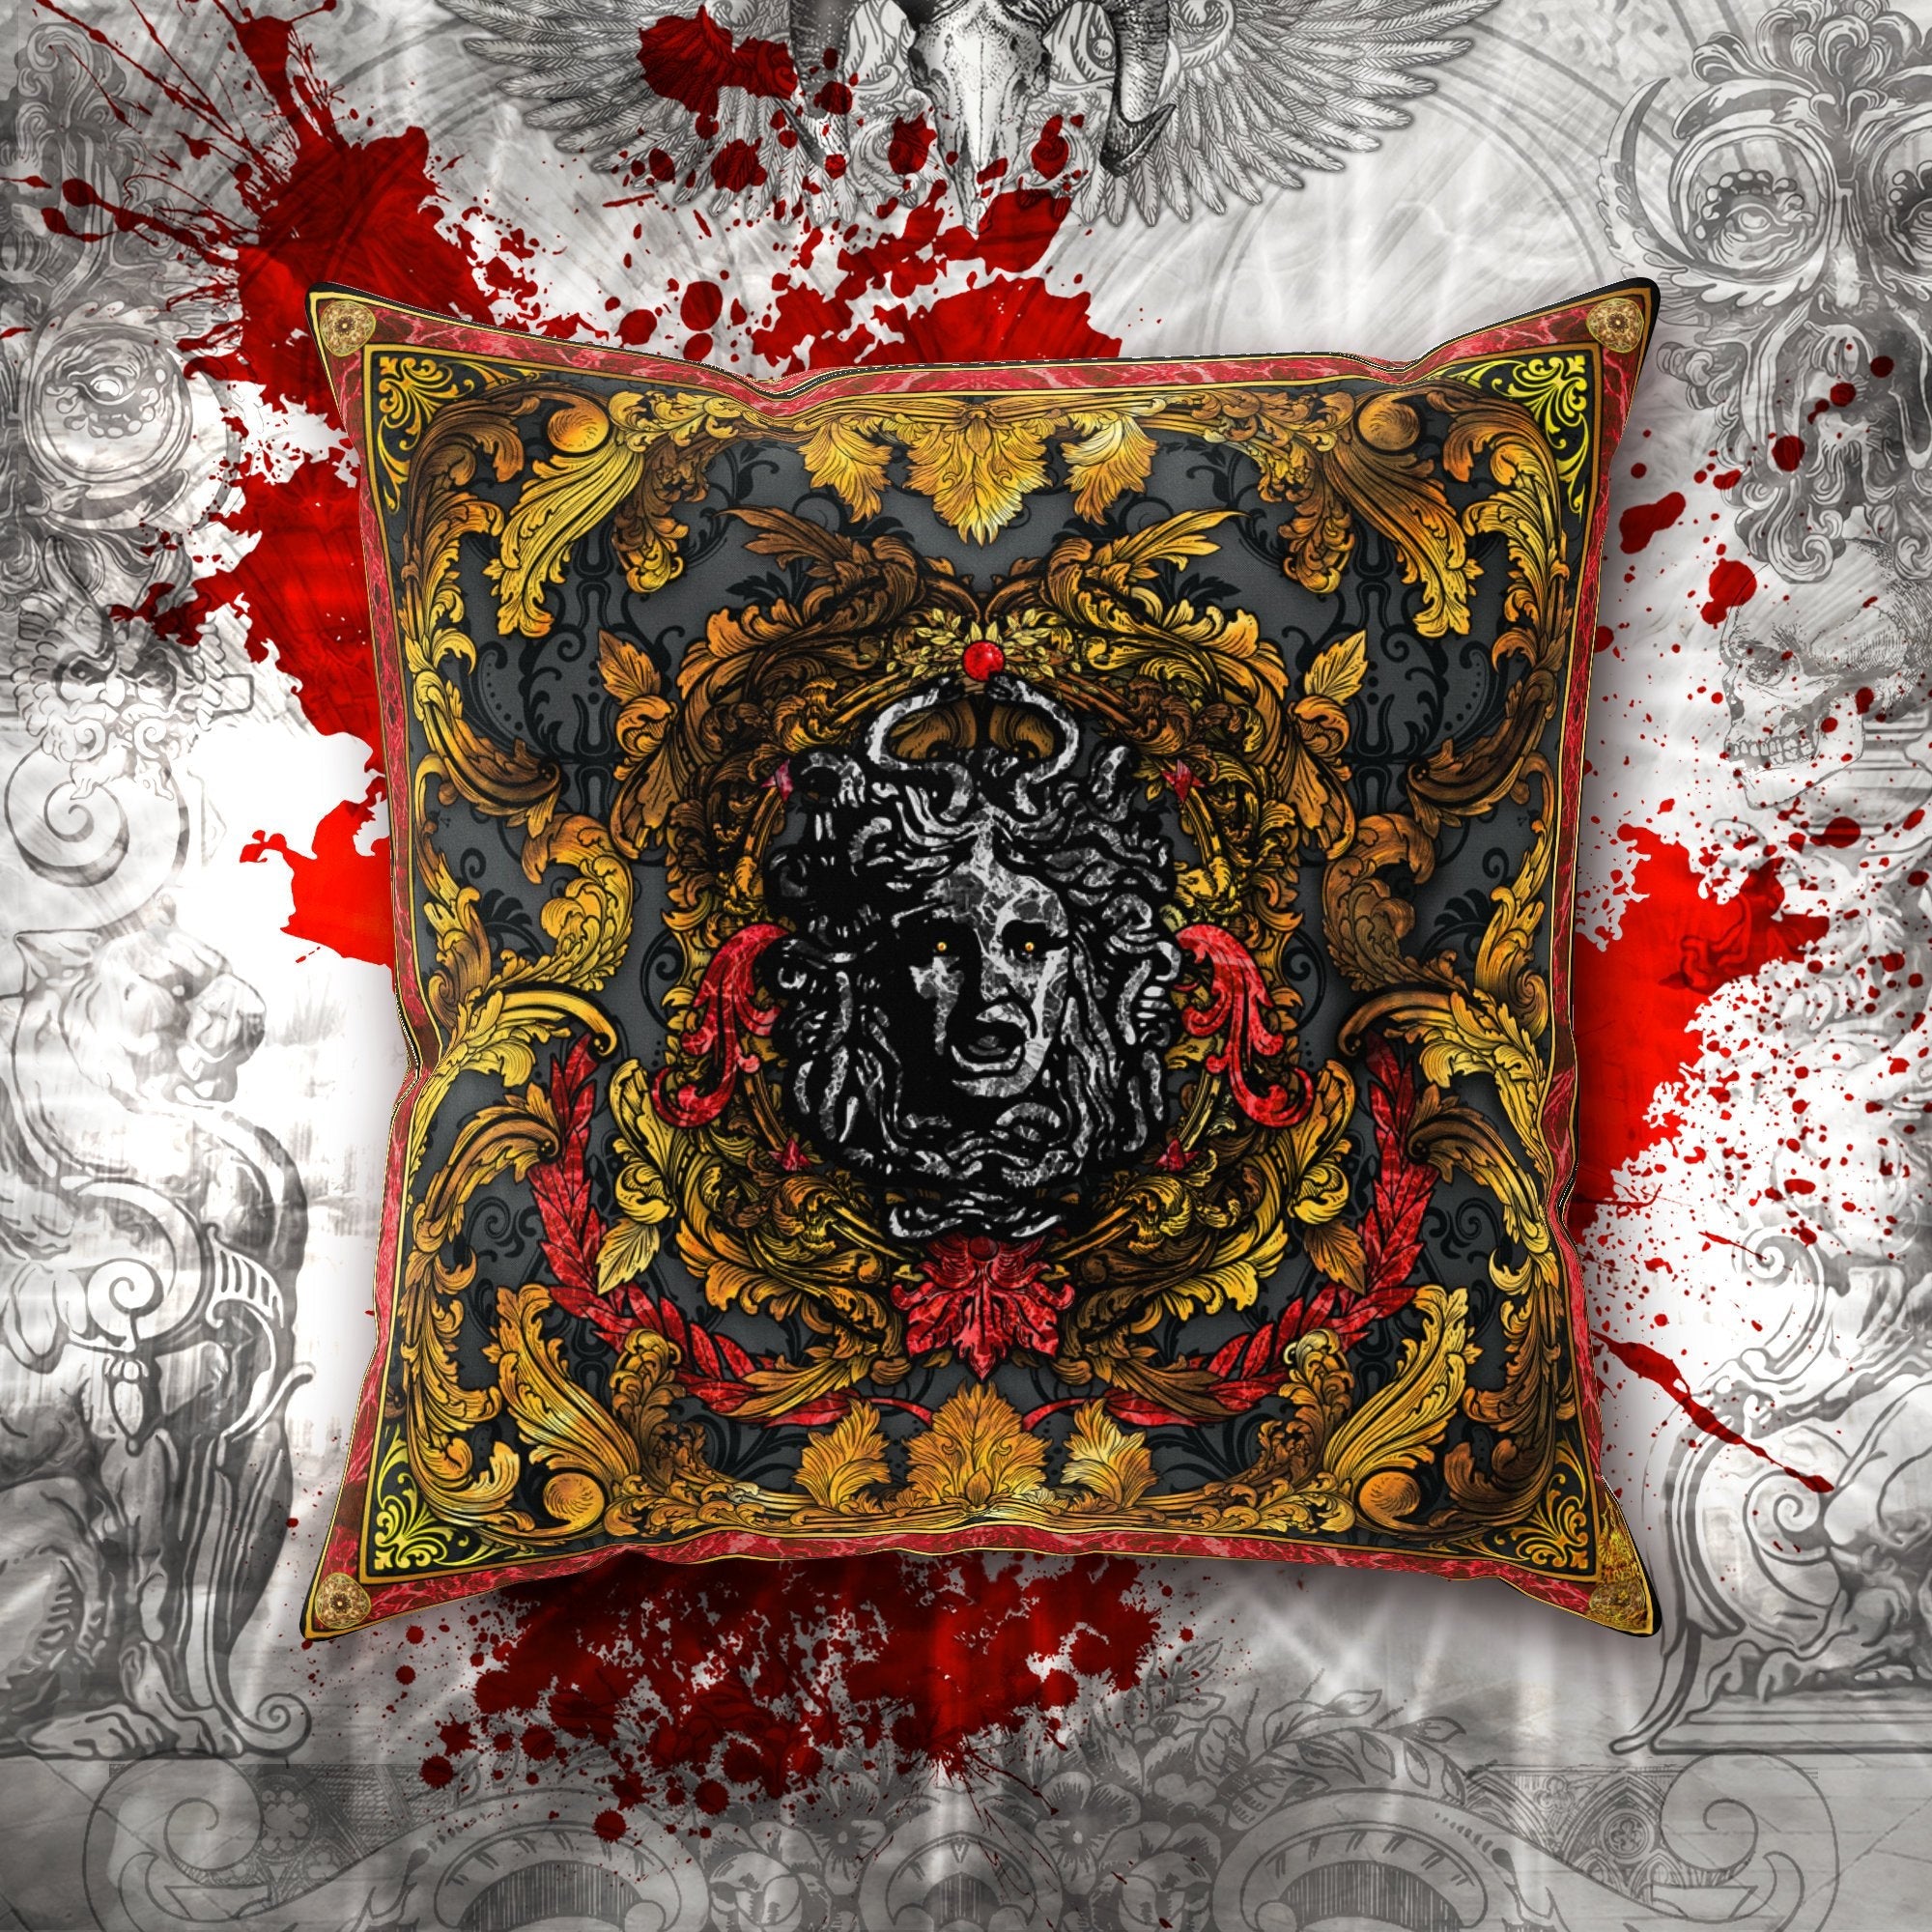 Vintage Throw Pillow, Decorative Accent Cushion, Ornamented Victorian Room Decor, Baroque Medusa, Indie and Eclectic Design - Abysm Internal